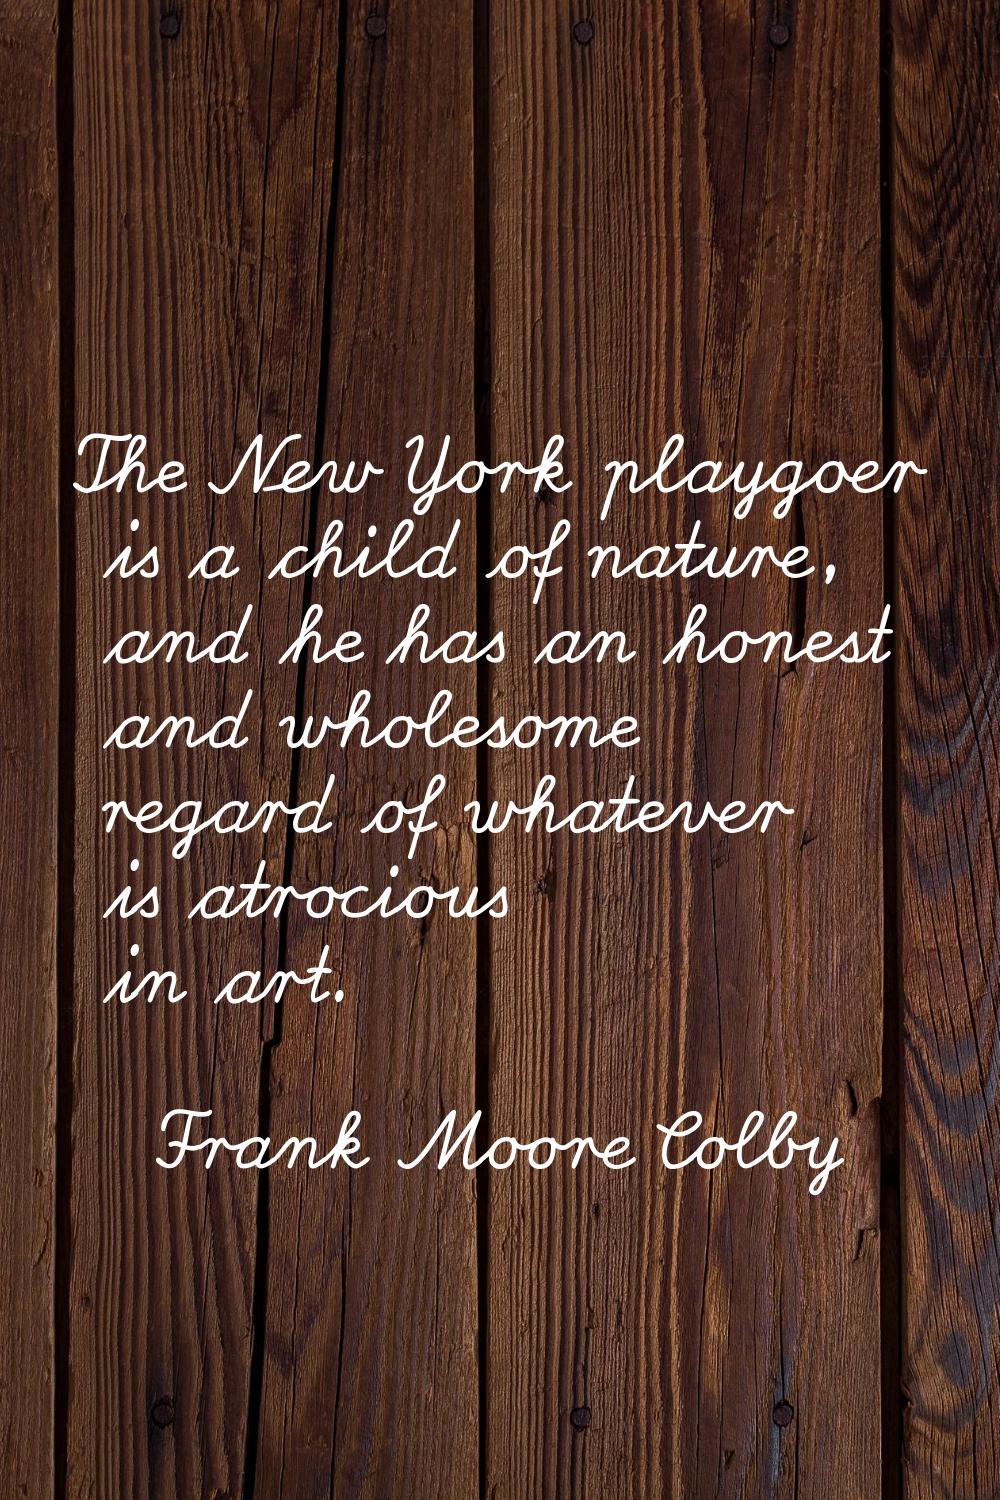 The New York playgoer is a child of nature, and he has an honest and wholesome regard of whatever i